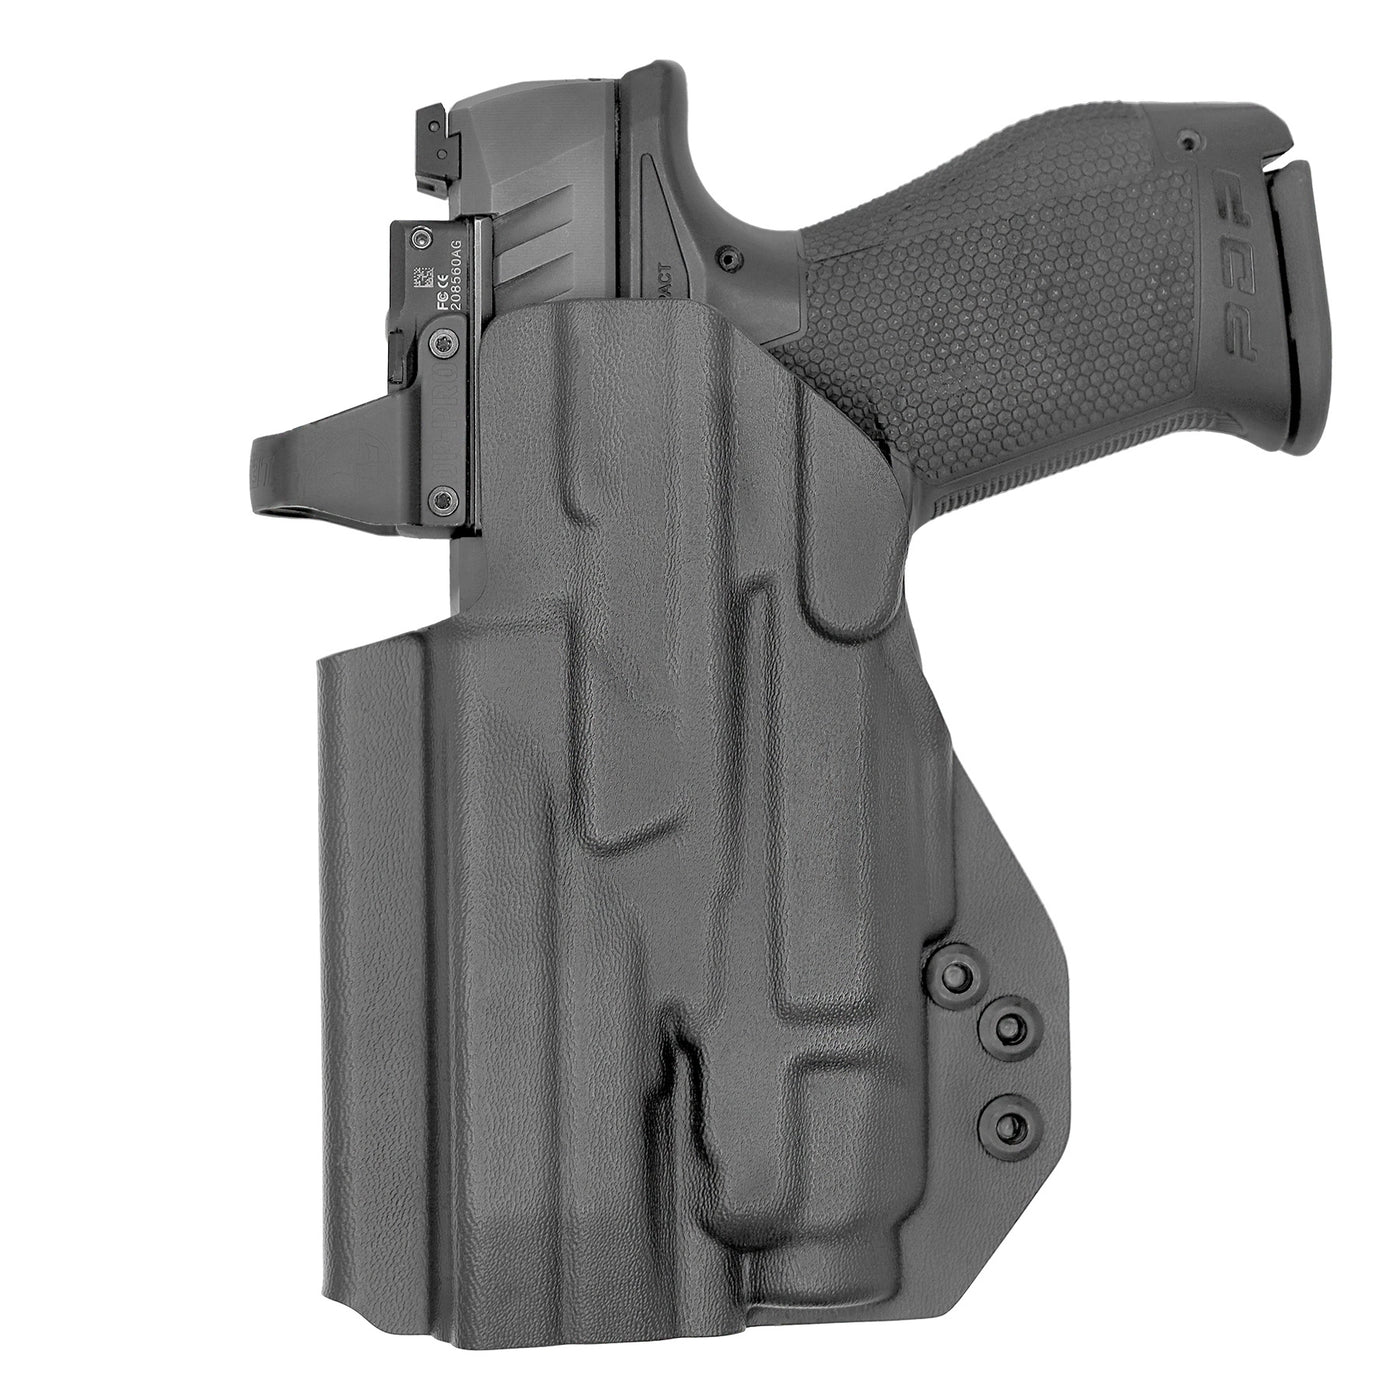 C&G Holsters Quickship IWB Tactical Walther PDP Streamlight TLR7/a in holstered position back view